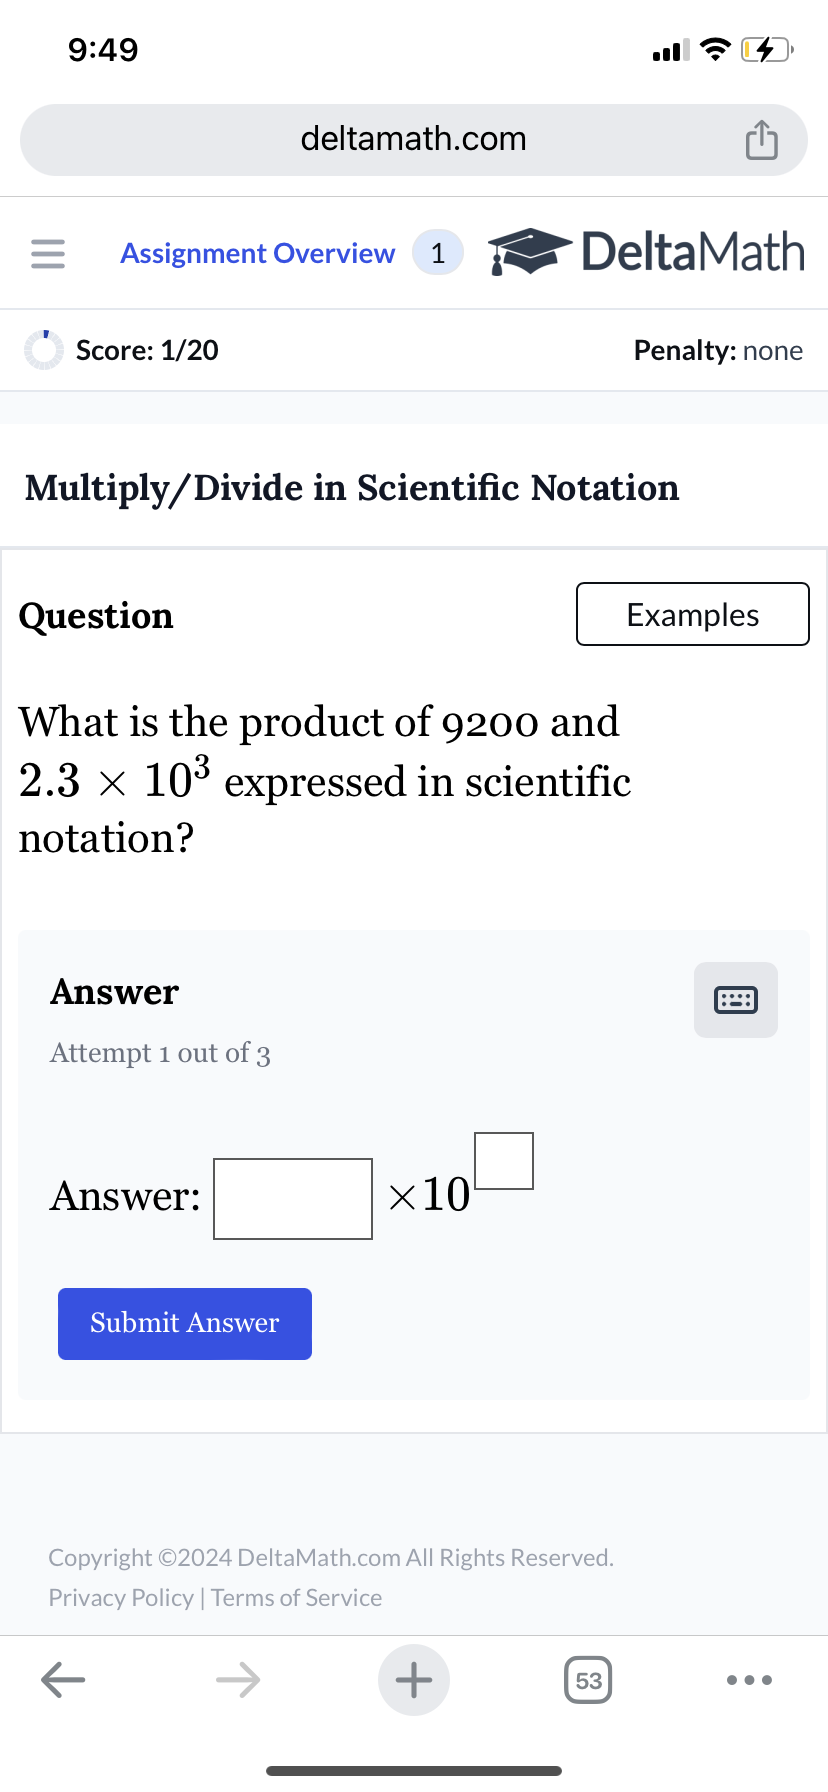 9:49
deltamath.com
= Assignment Overview 1
DeltaMath
Score: 1/20
Penalty: none
Multiply/Divide in Scientific Notation
Question
What is the product of 9200 and
2.3 × 10³ expressed in scientific
notation?
Answer
Attempt 1 out of 3
Answer:
Submit Answer
×10
Copyright ©2024 DeltaMath.com All Rights Reserved.
Privacy Policy | Terms of Service
←
+
53
Examples